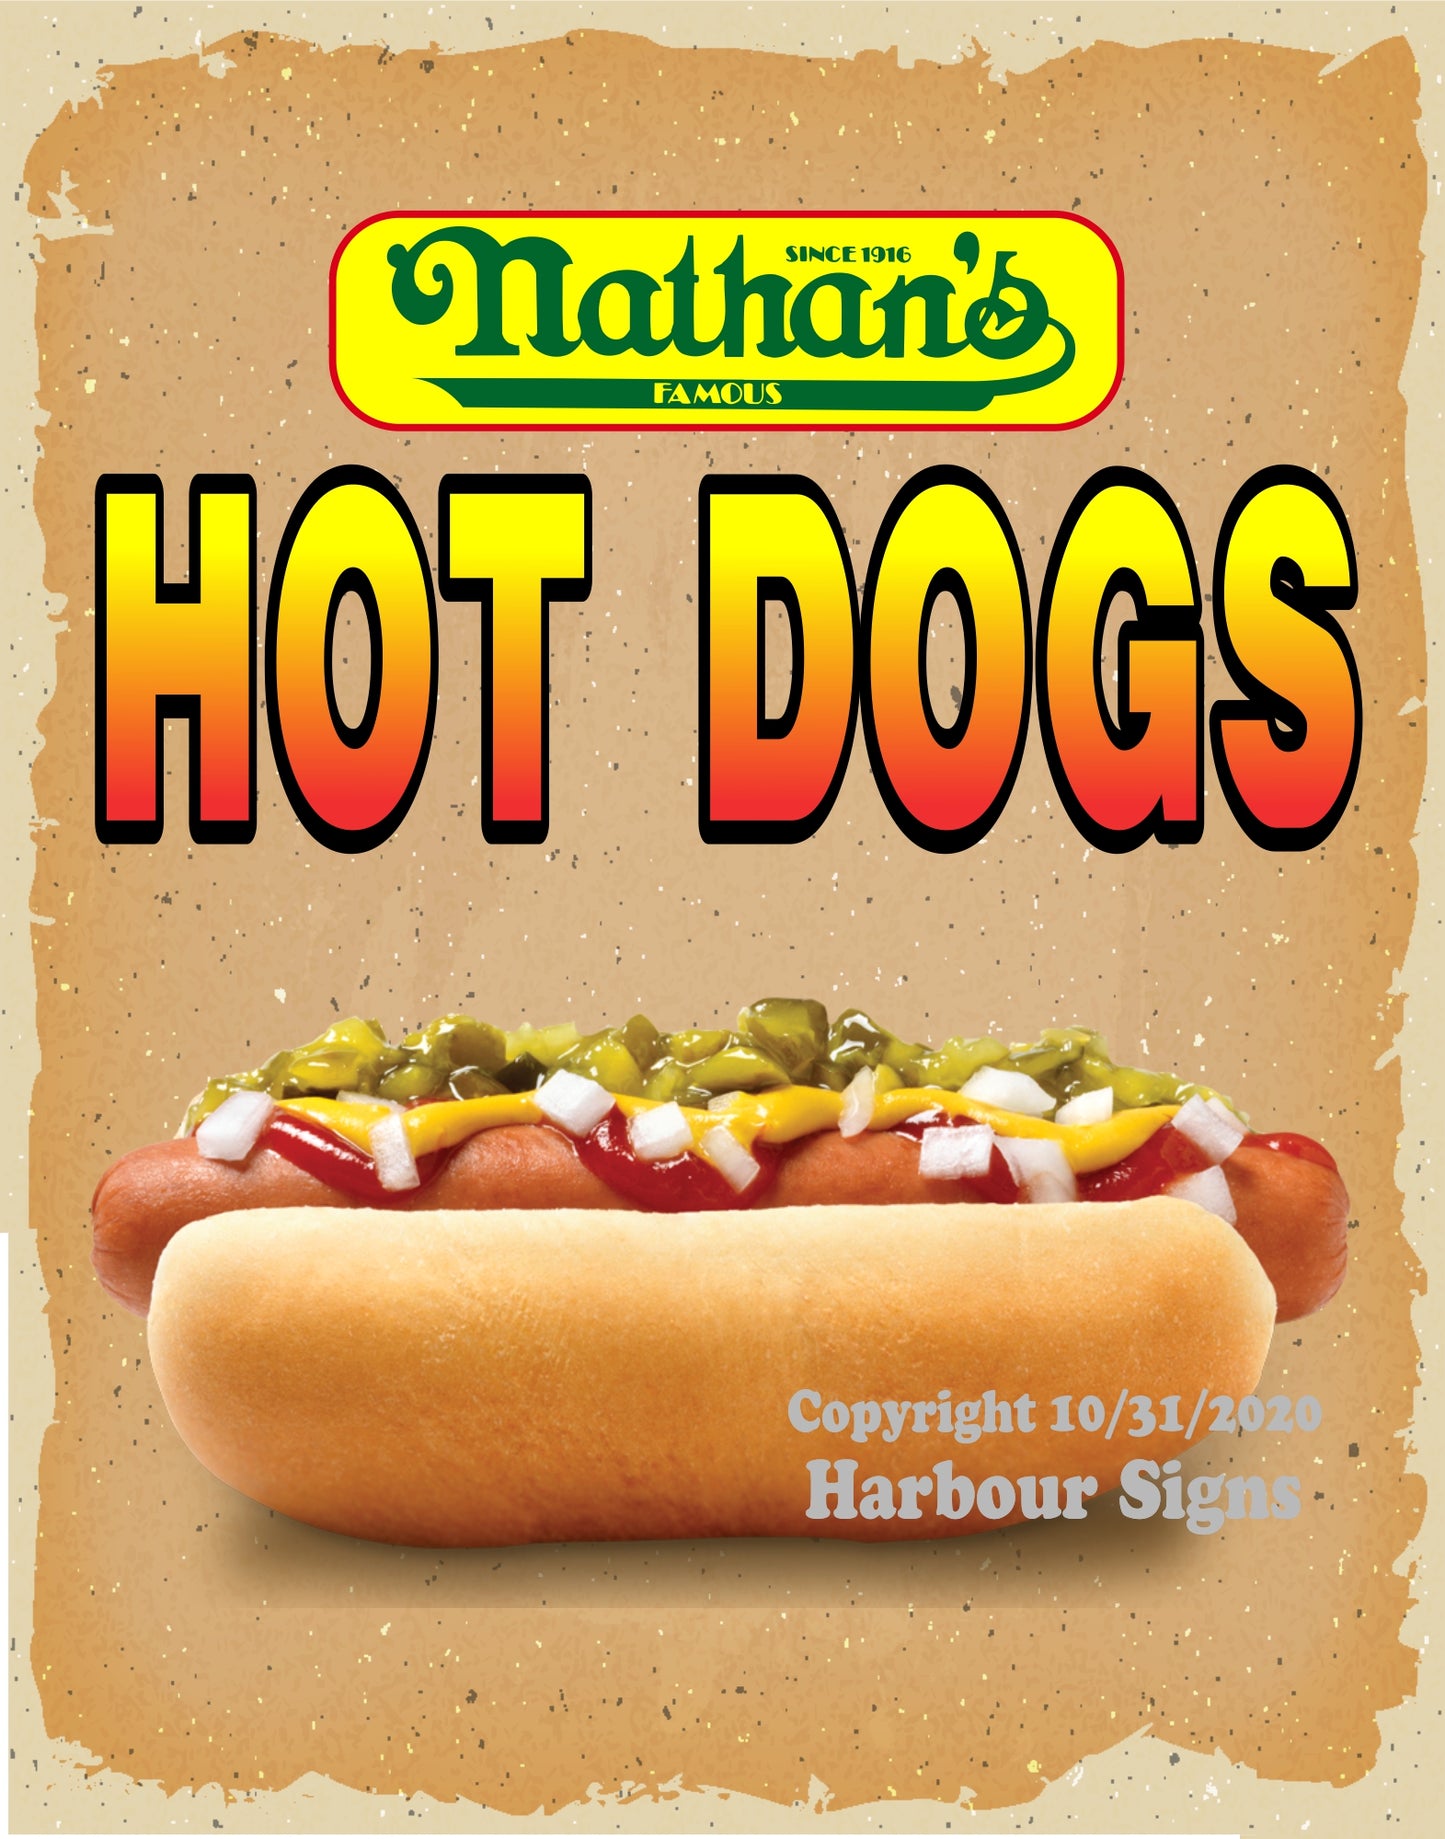 Hot Dogs Nathan's Decal Food Truck Concession Vinyl Sticker v